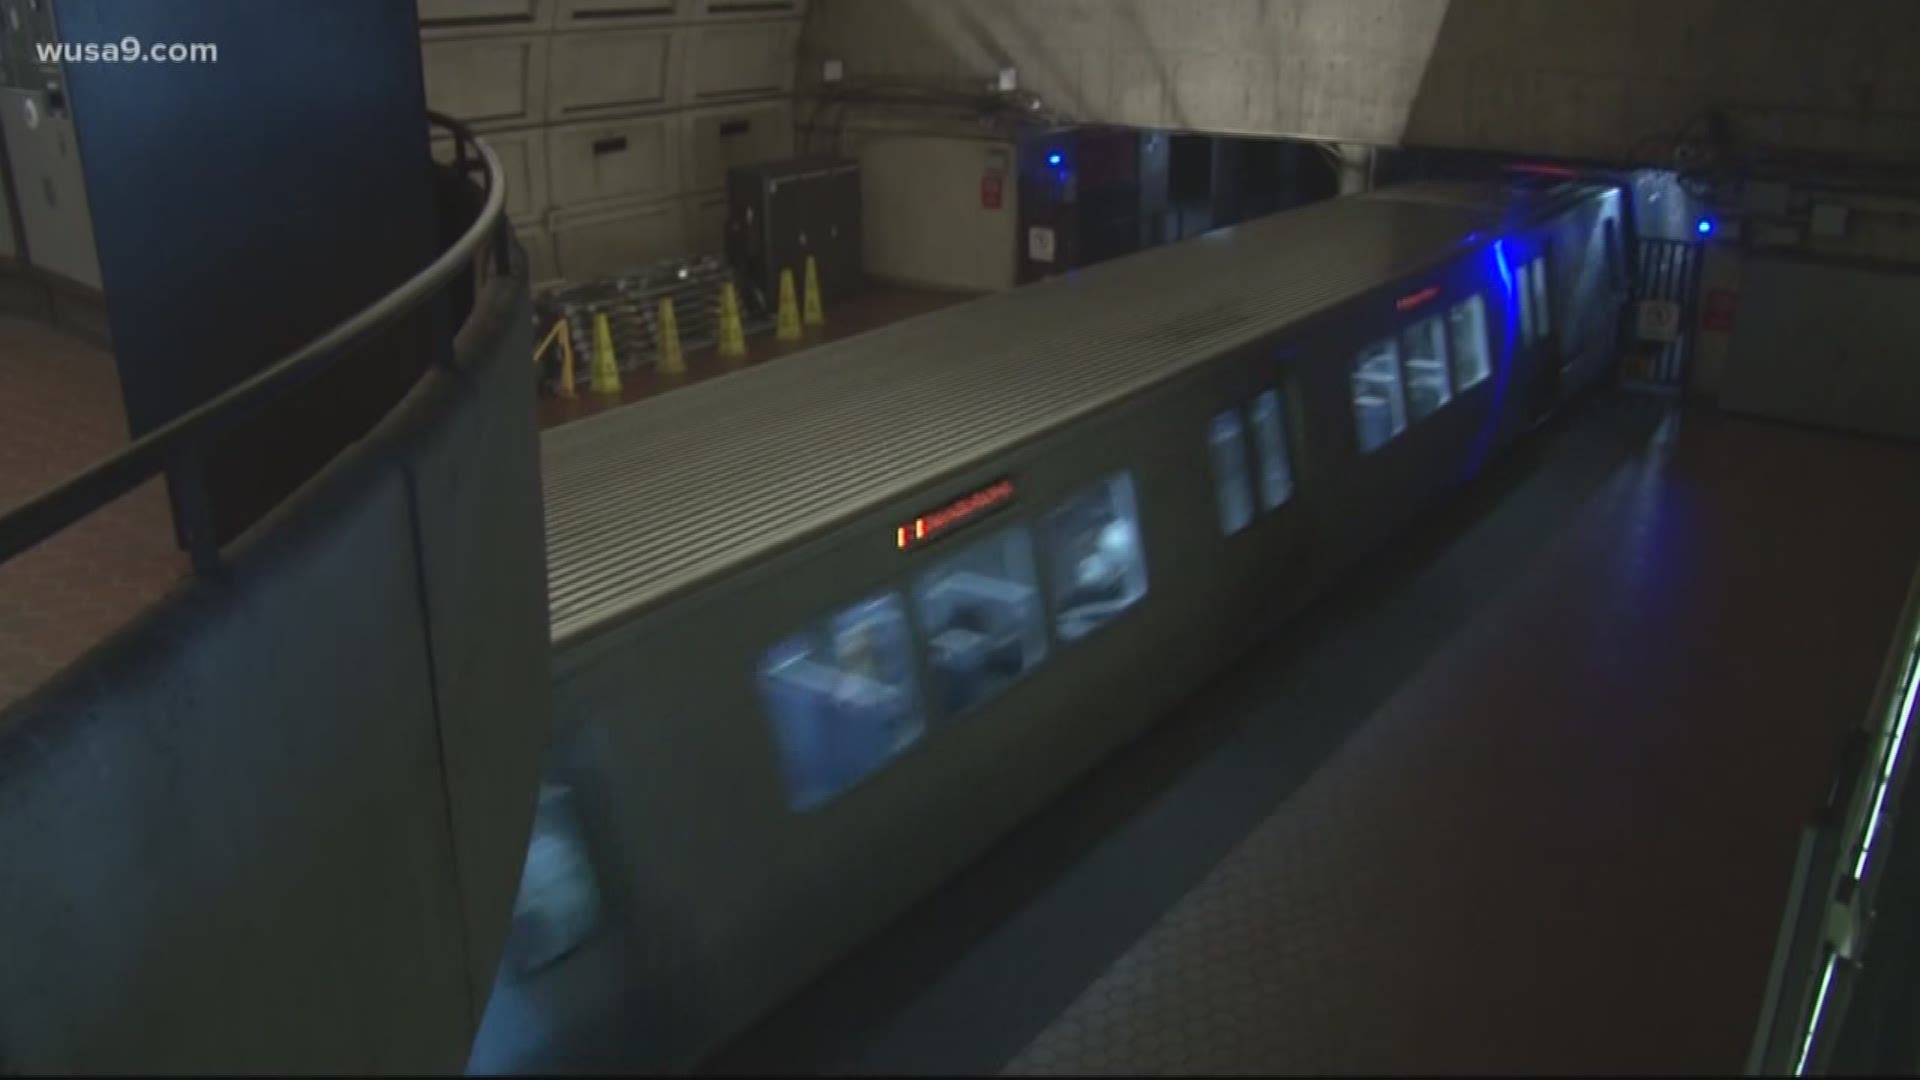 Metro says customers won't be able to board the front or rear cars on trains in order to create an additional buffer between the operator's compartment and commuters